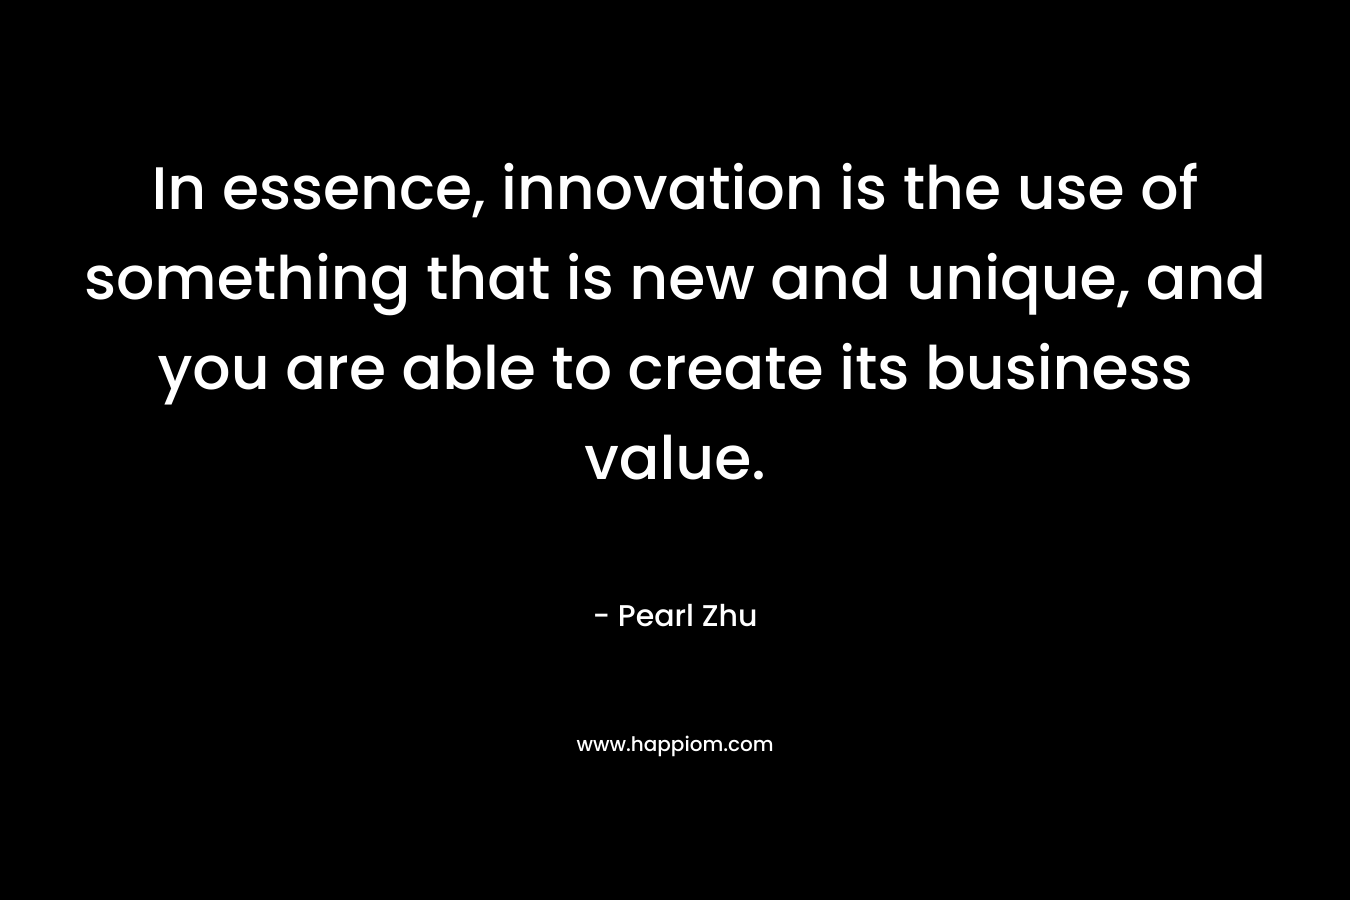 In essence, innovation is the use of something that is new and unique, and you are able to create its business value. – Pearl  Zhu